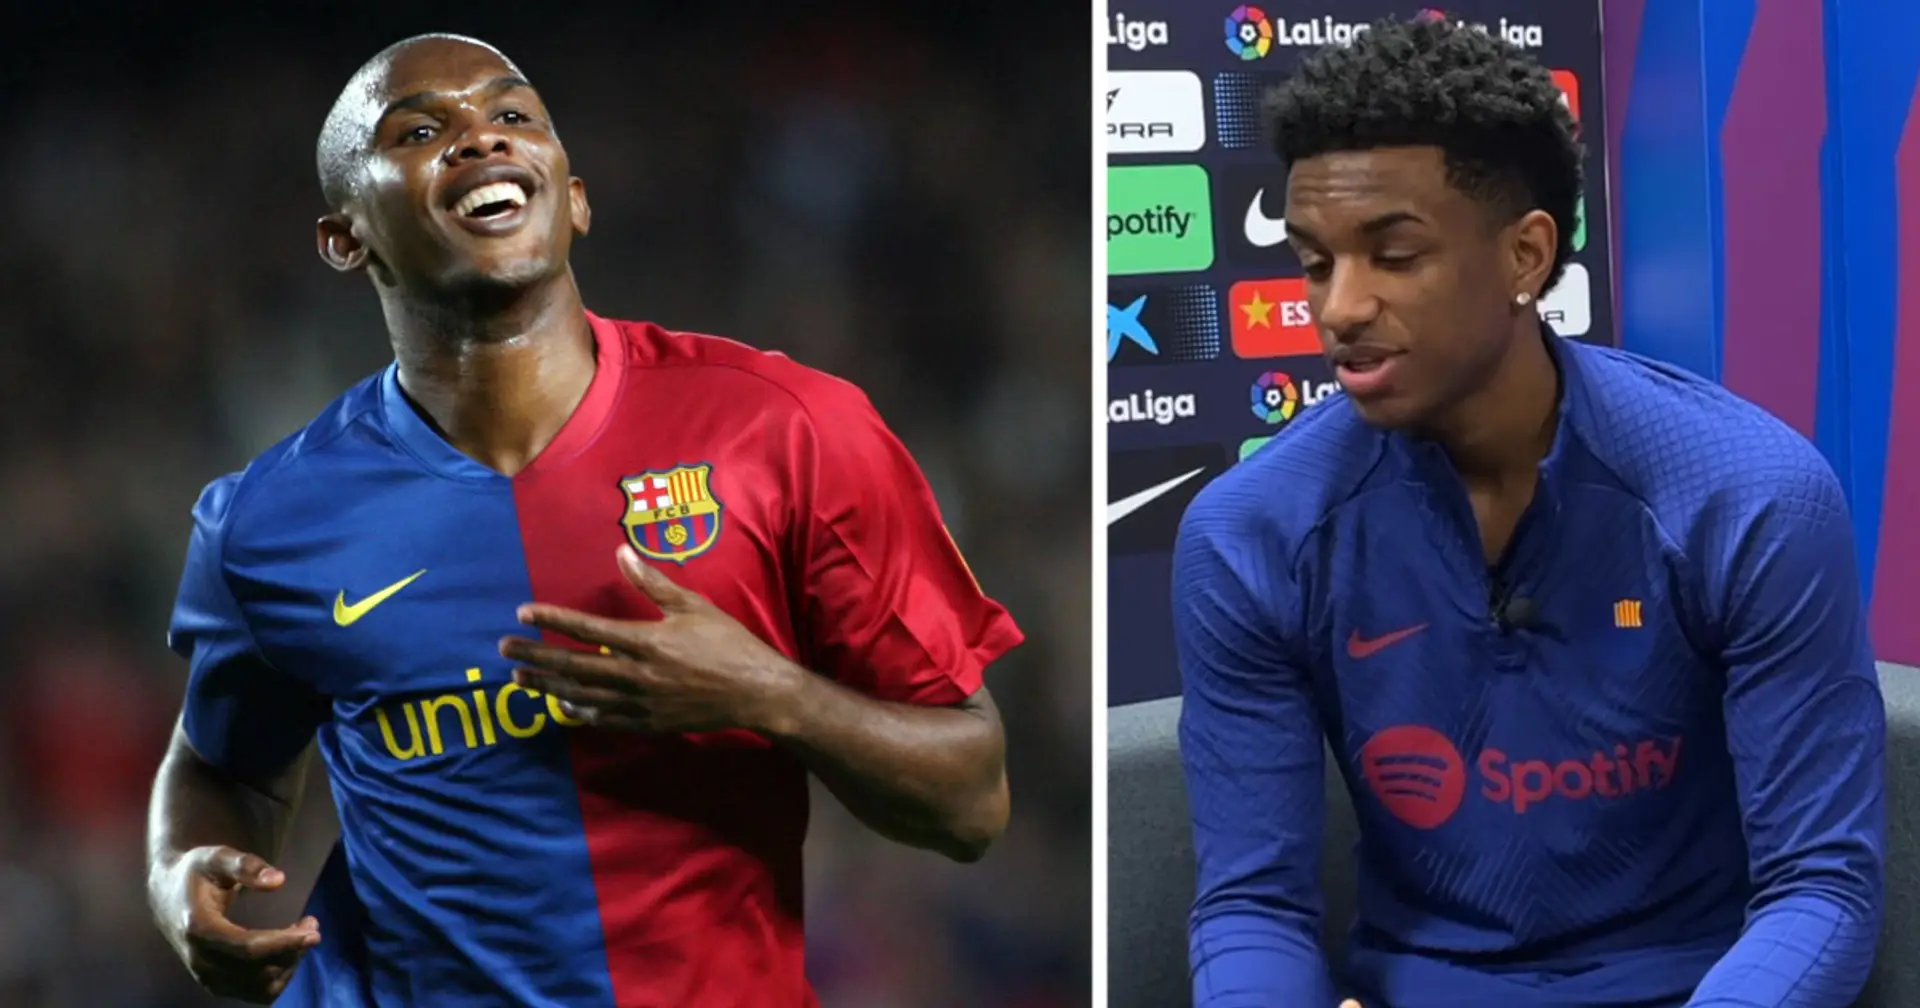 Balde names 2 Barca legends he'd like to play with — no Messi